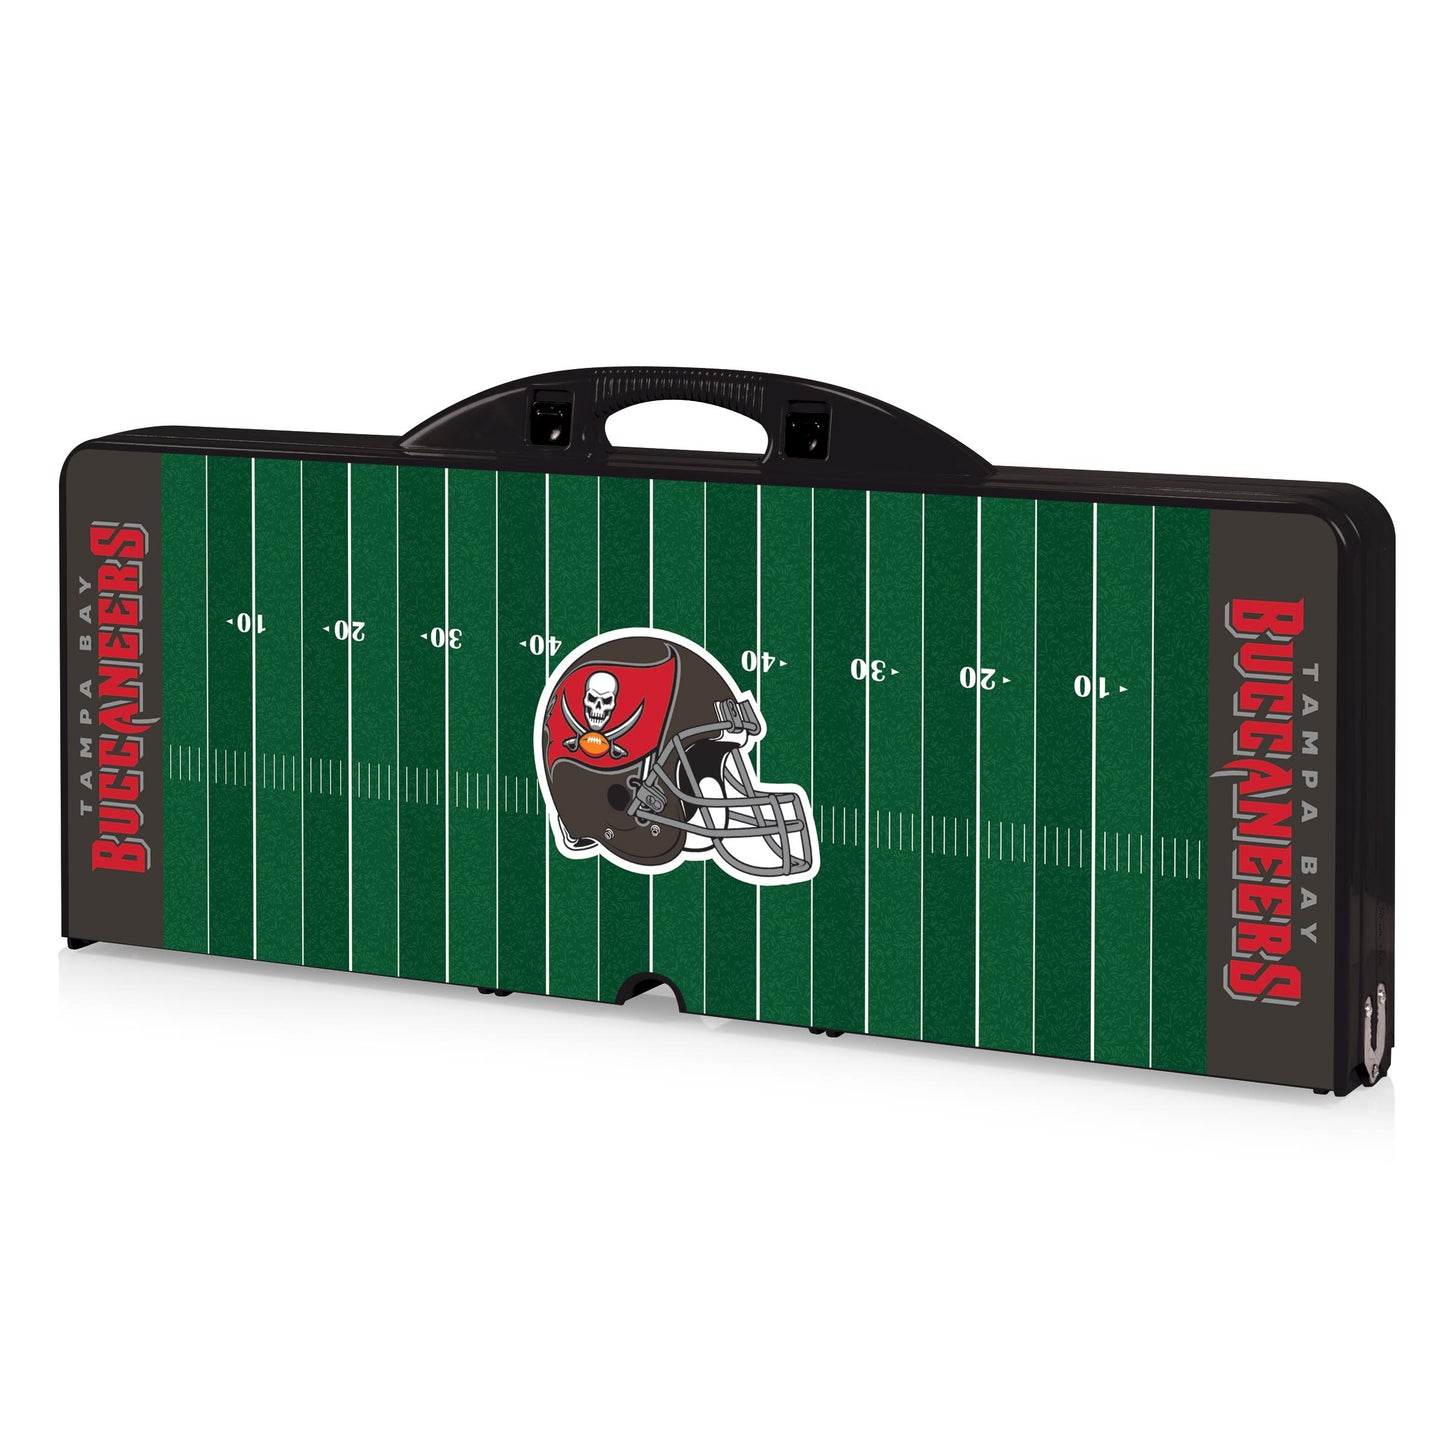 Tampa Bay Buccaneers - Picnic Table Portable Folding Table with Seats - Football Field Style